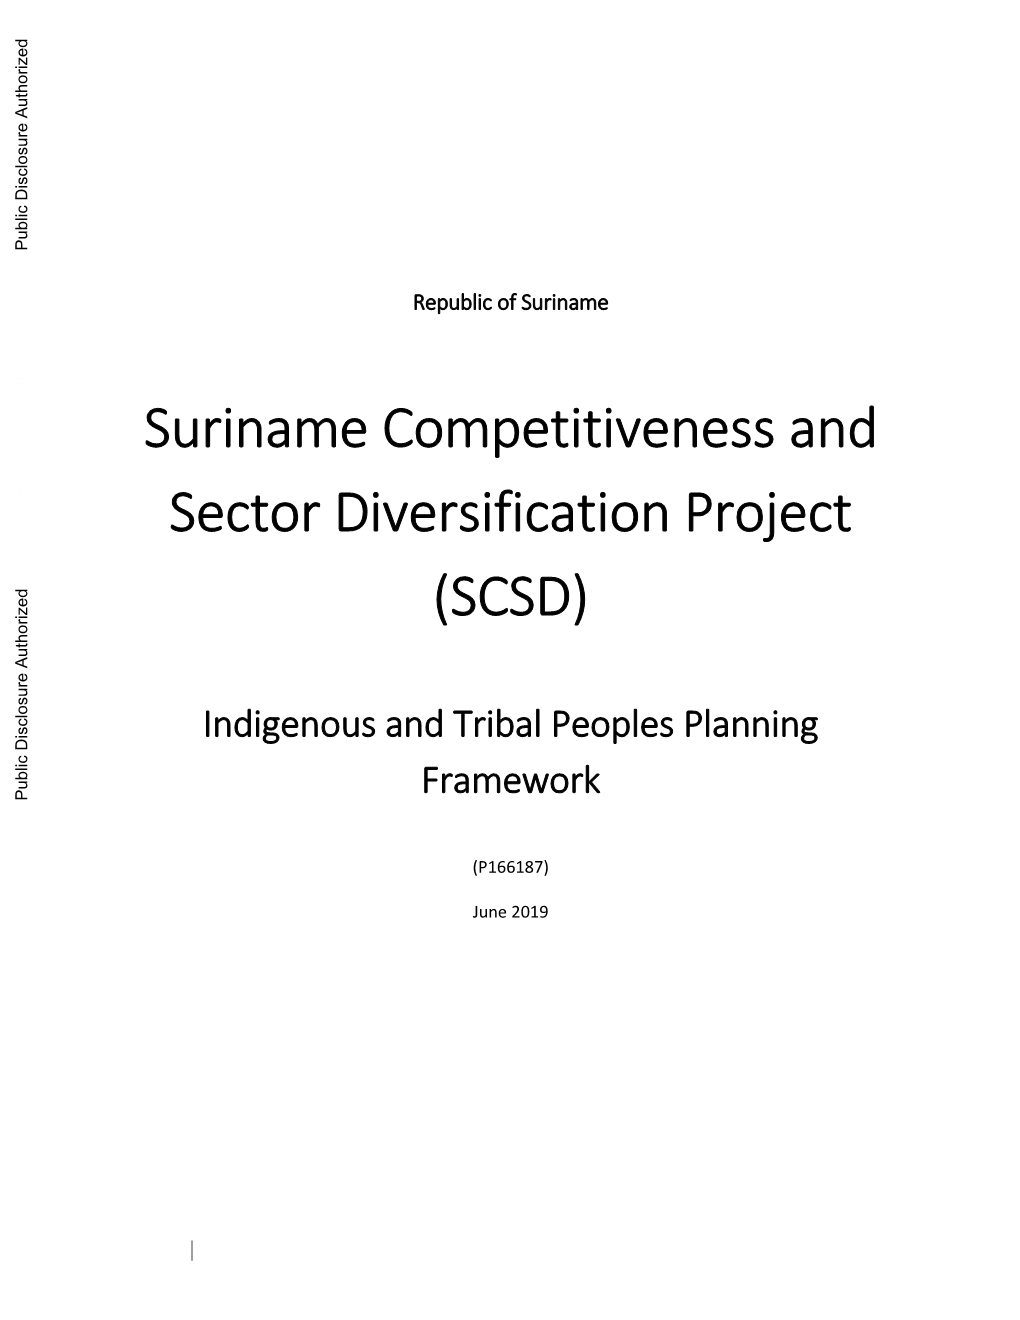 Suriname Competitiveness and Sector Diversification Project (SCSD)